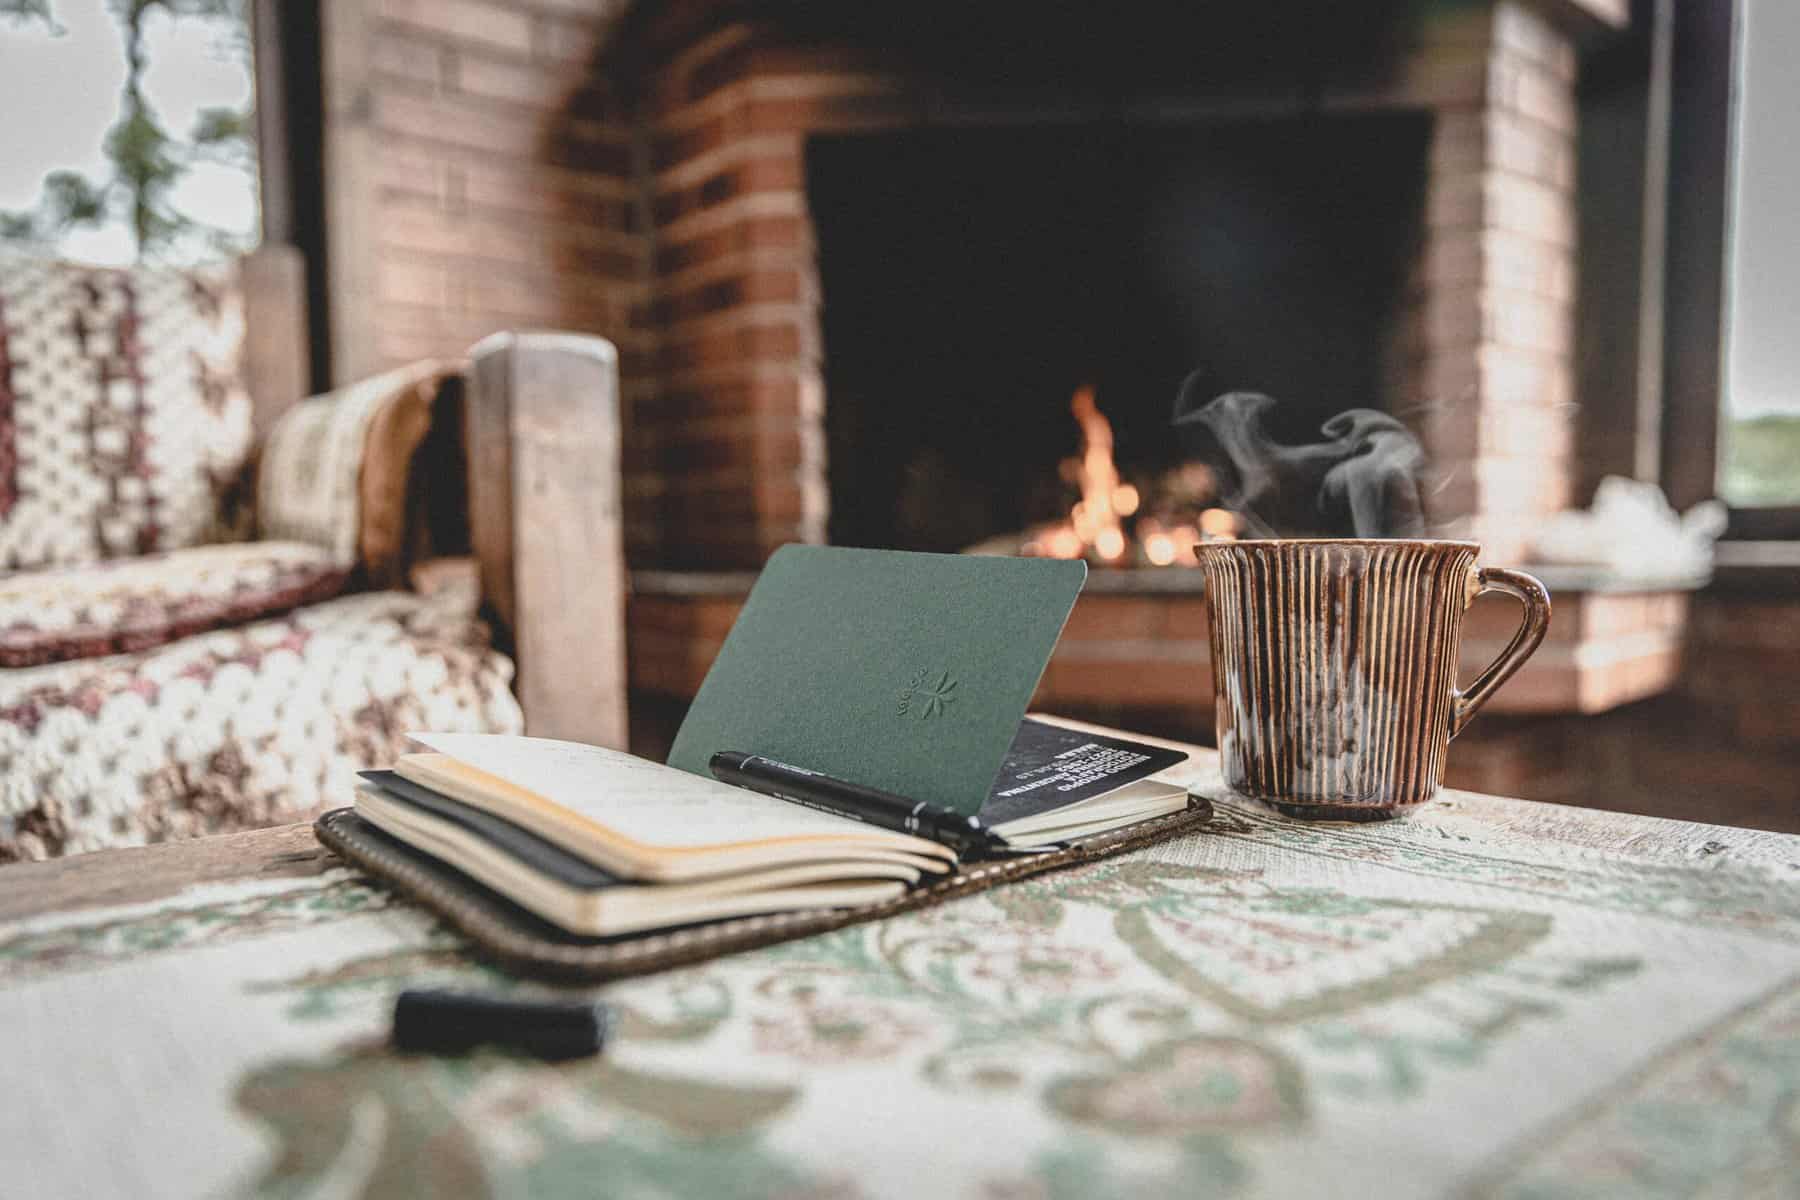 journal and cup of coffee next to a cozy fireplace